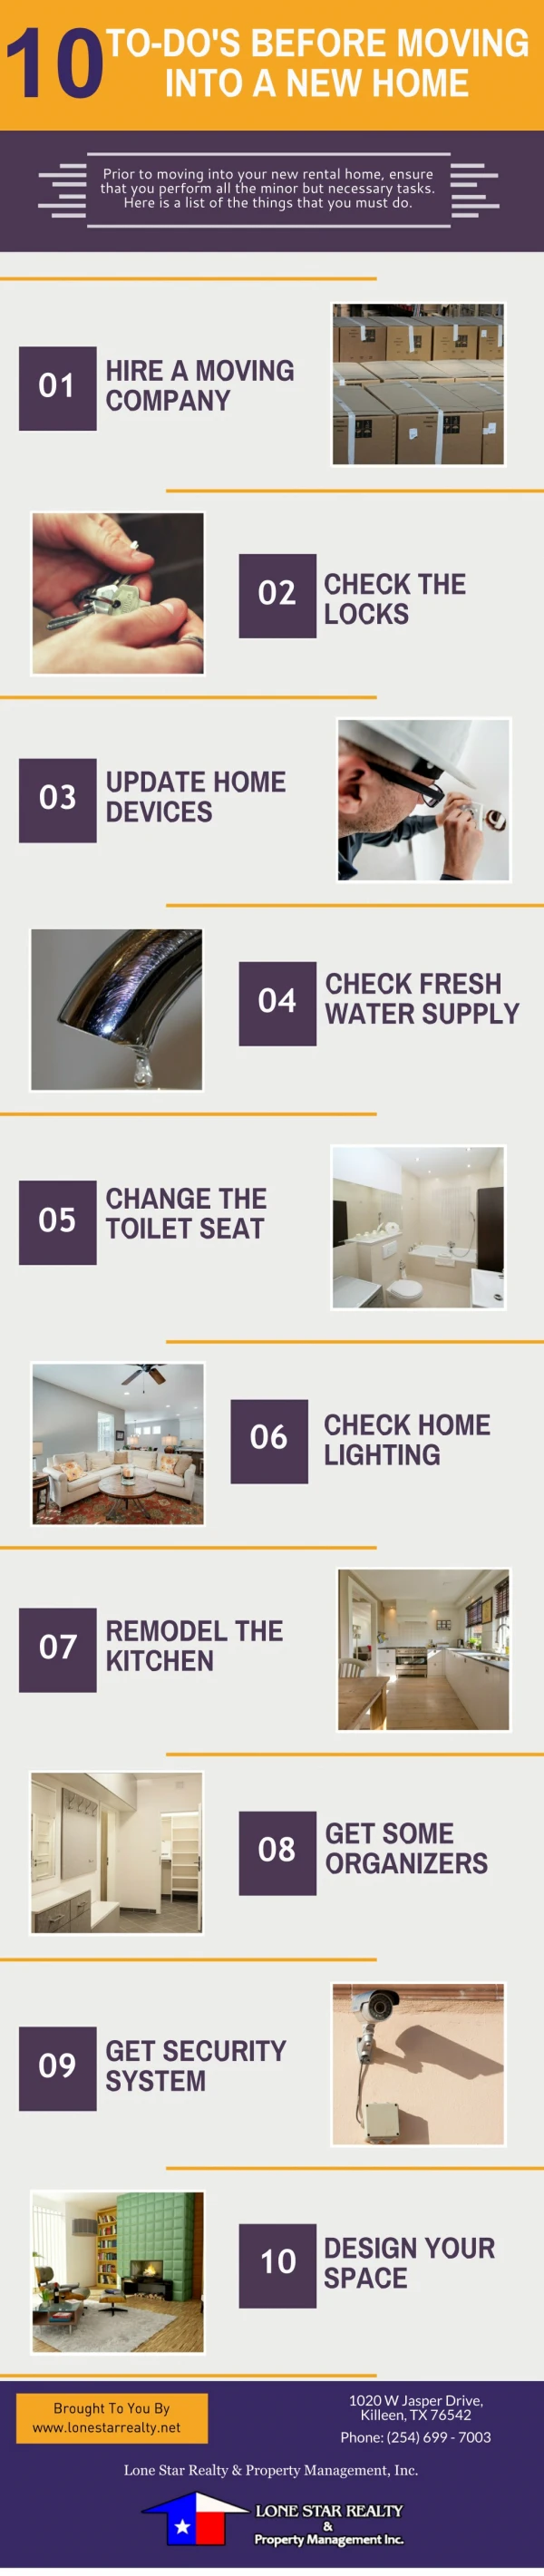 10 To-Do's Before Moving Into A New Home